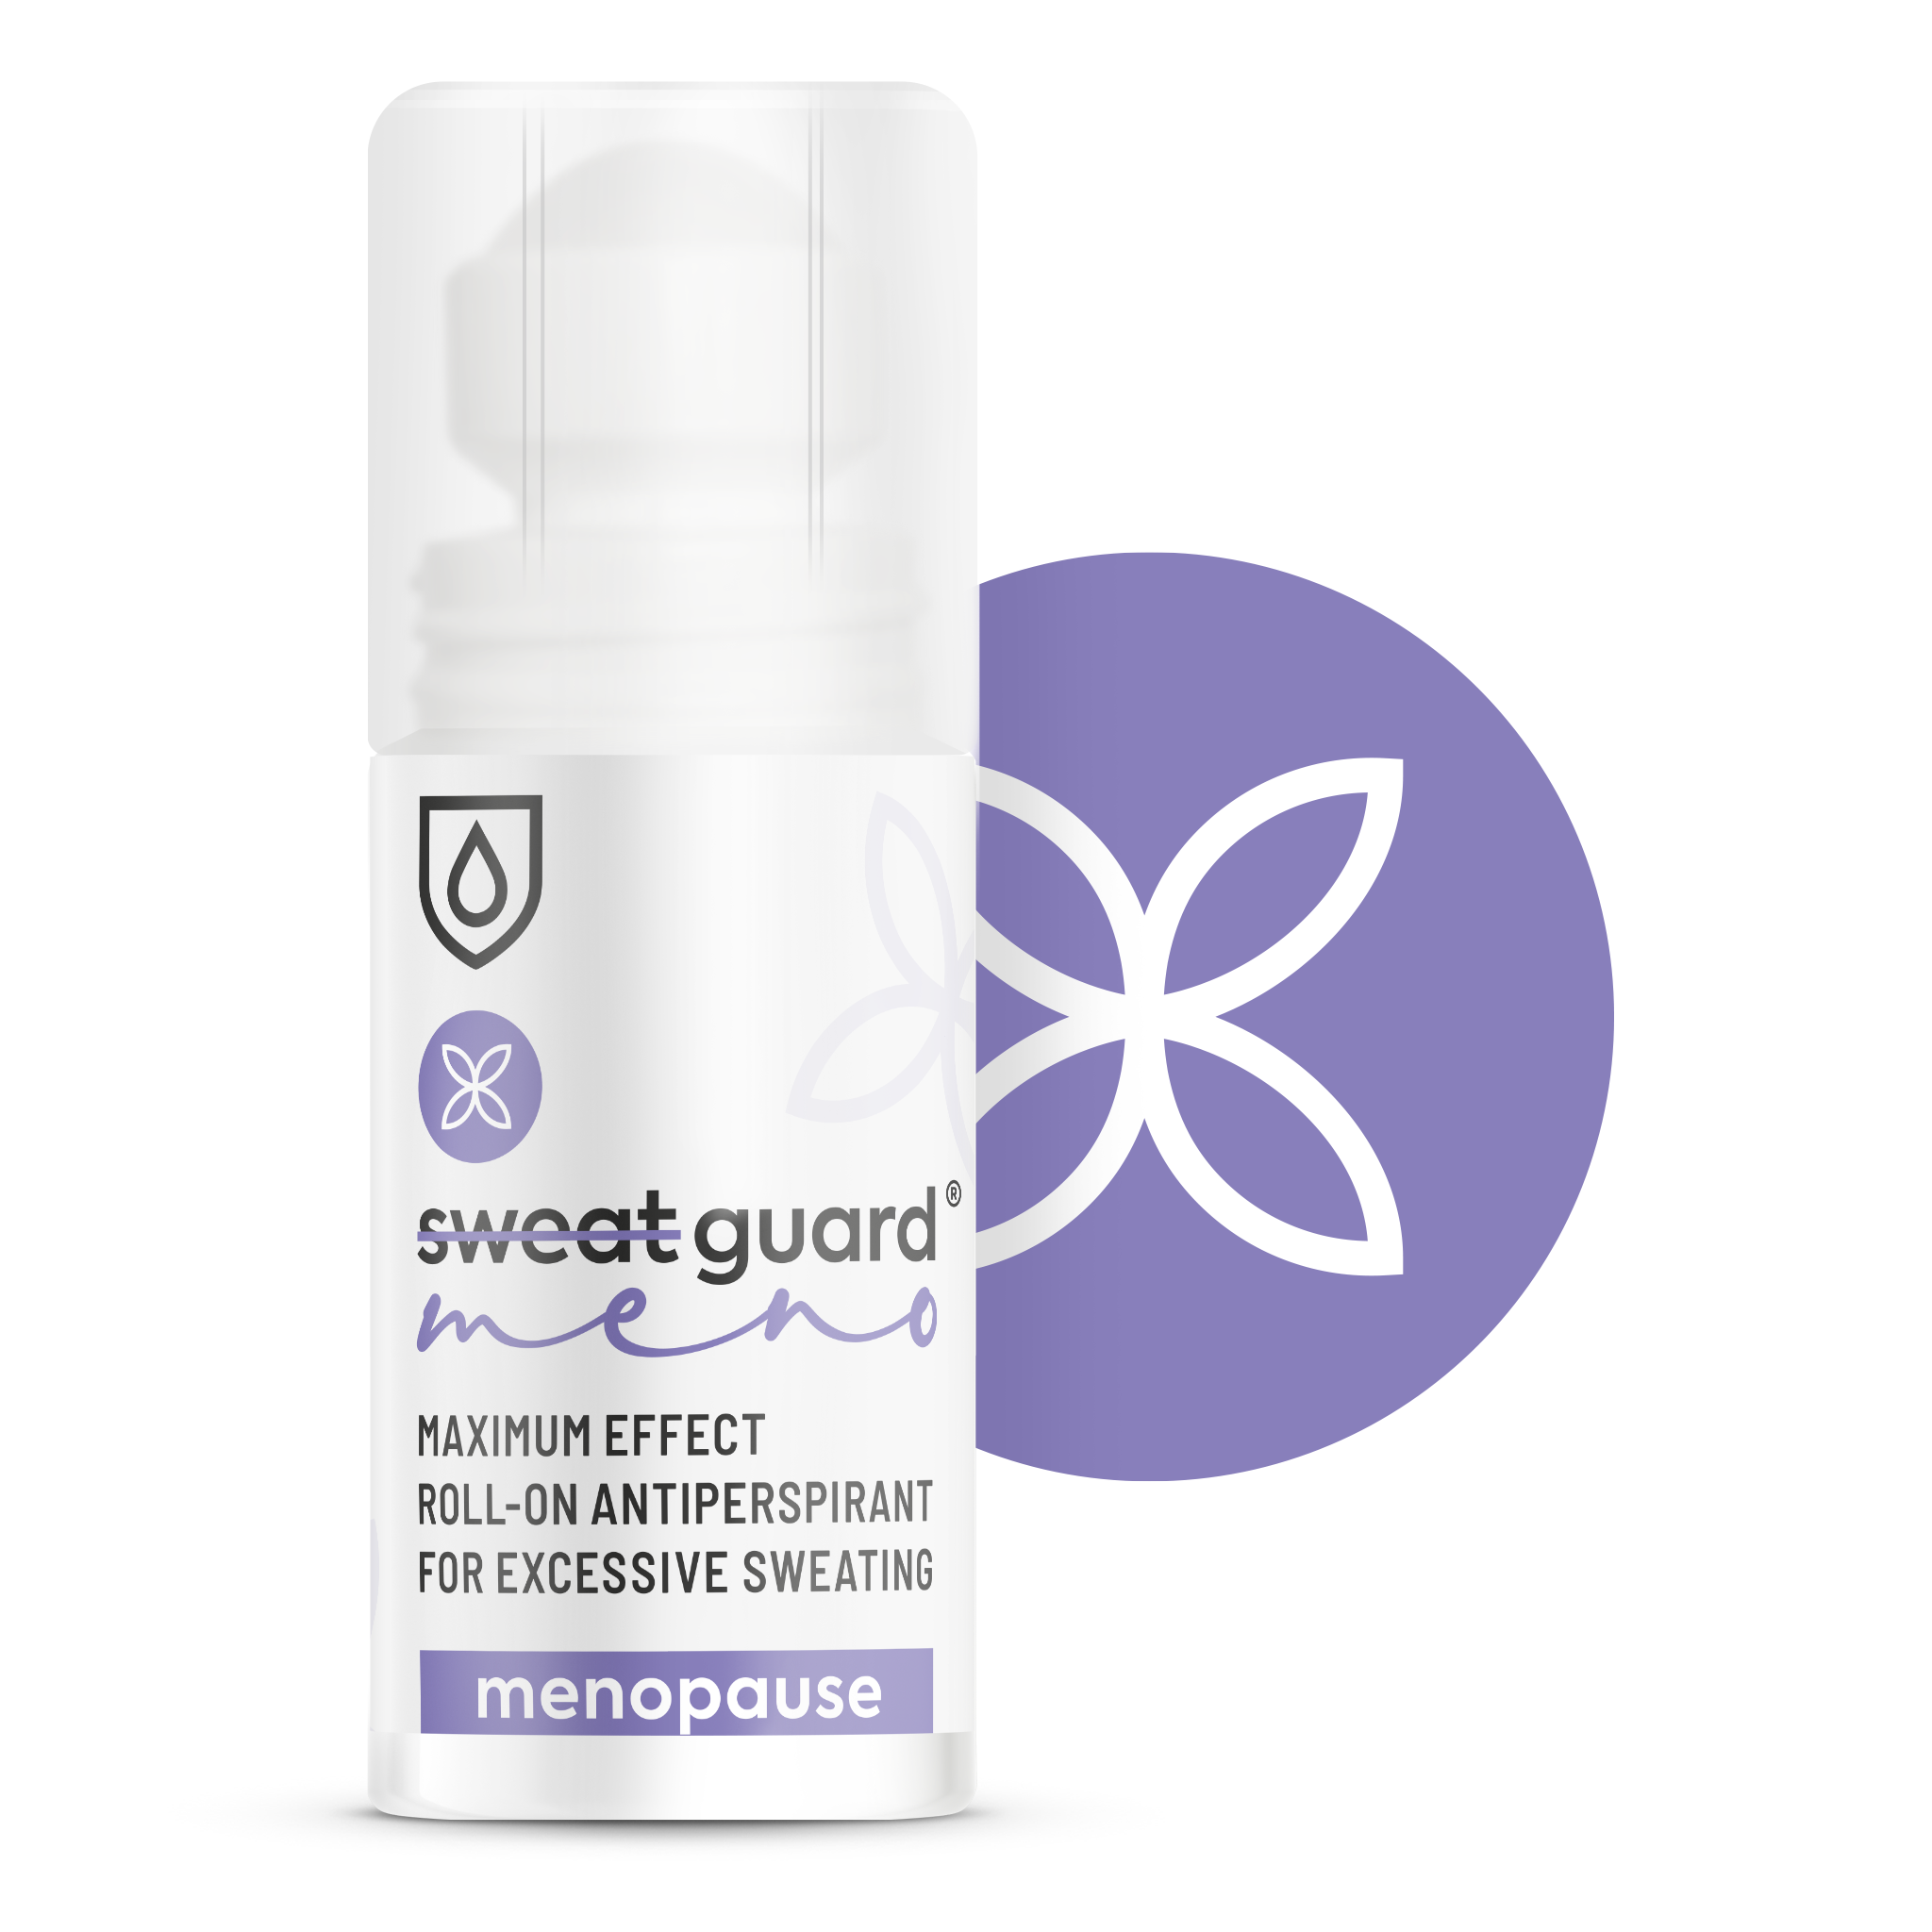 Clinically formulated, menopause antiperspirant. Relief from  increased sweating, hot flushes, night sweats and changes in body odour.